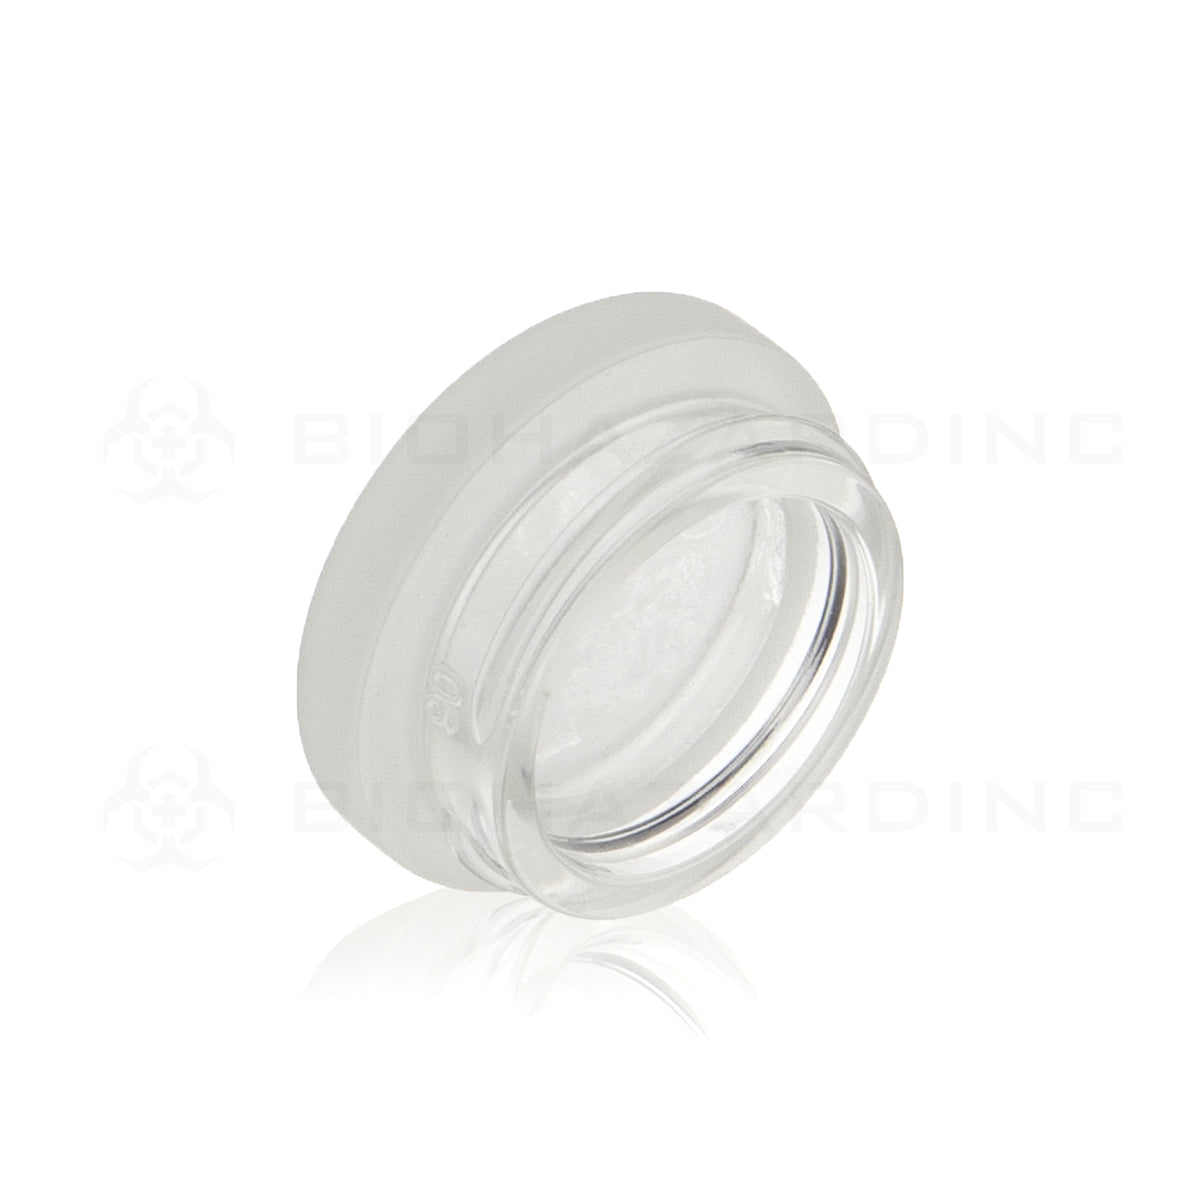 Concentrate Containers | Glass Concentrate Jars - Frosted | 38mm -  7mL - 96 Count Concentrate Container Biohazard Inc   